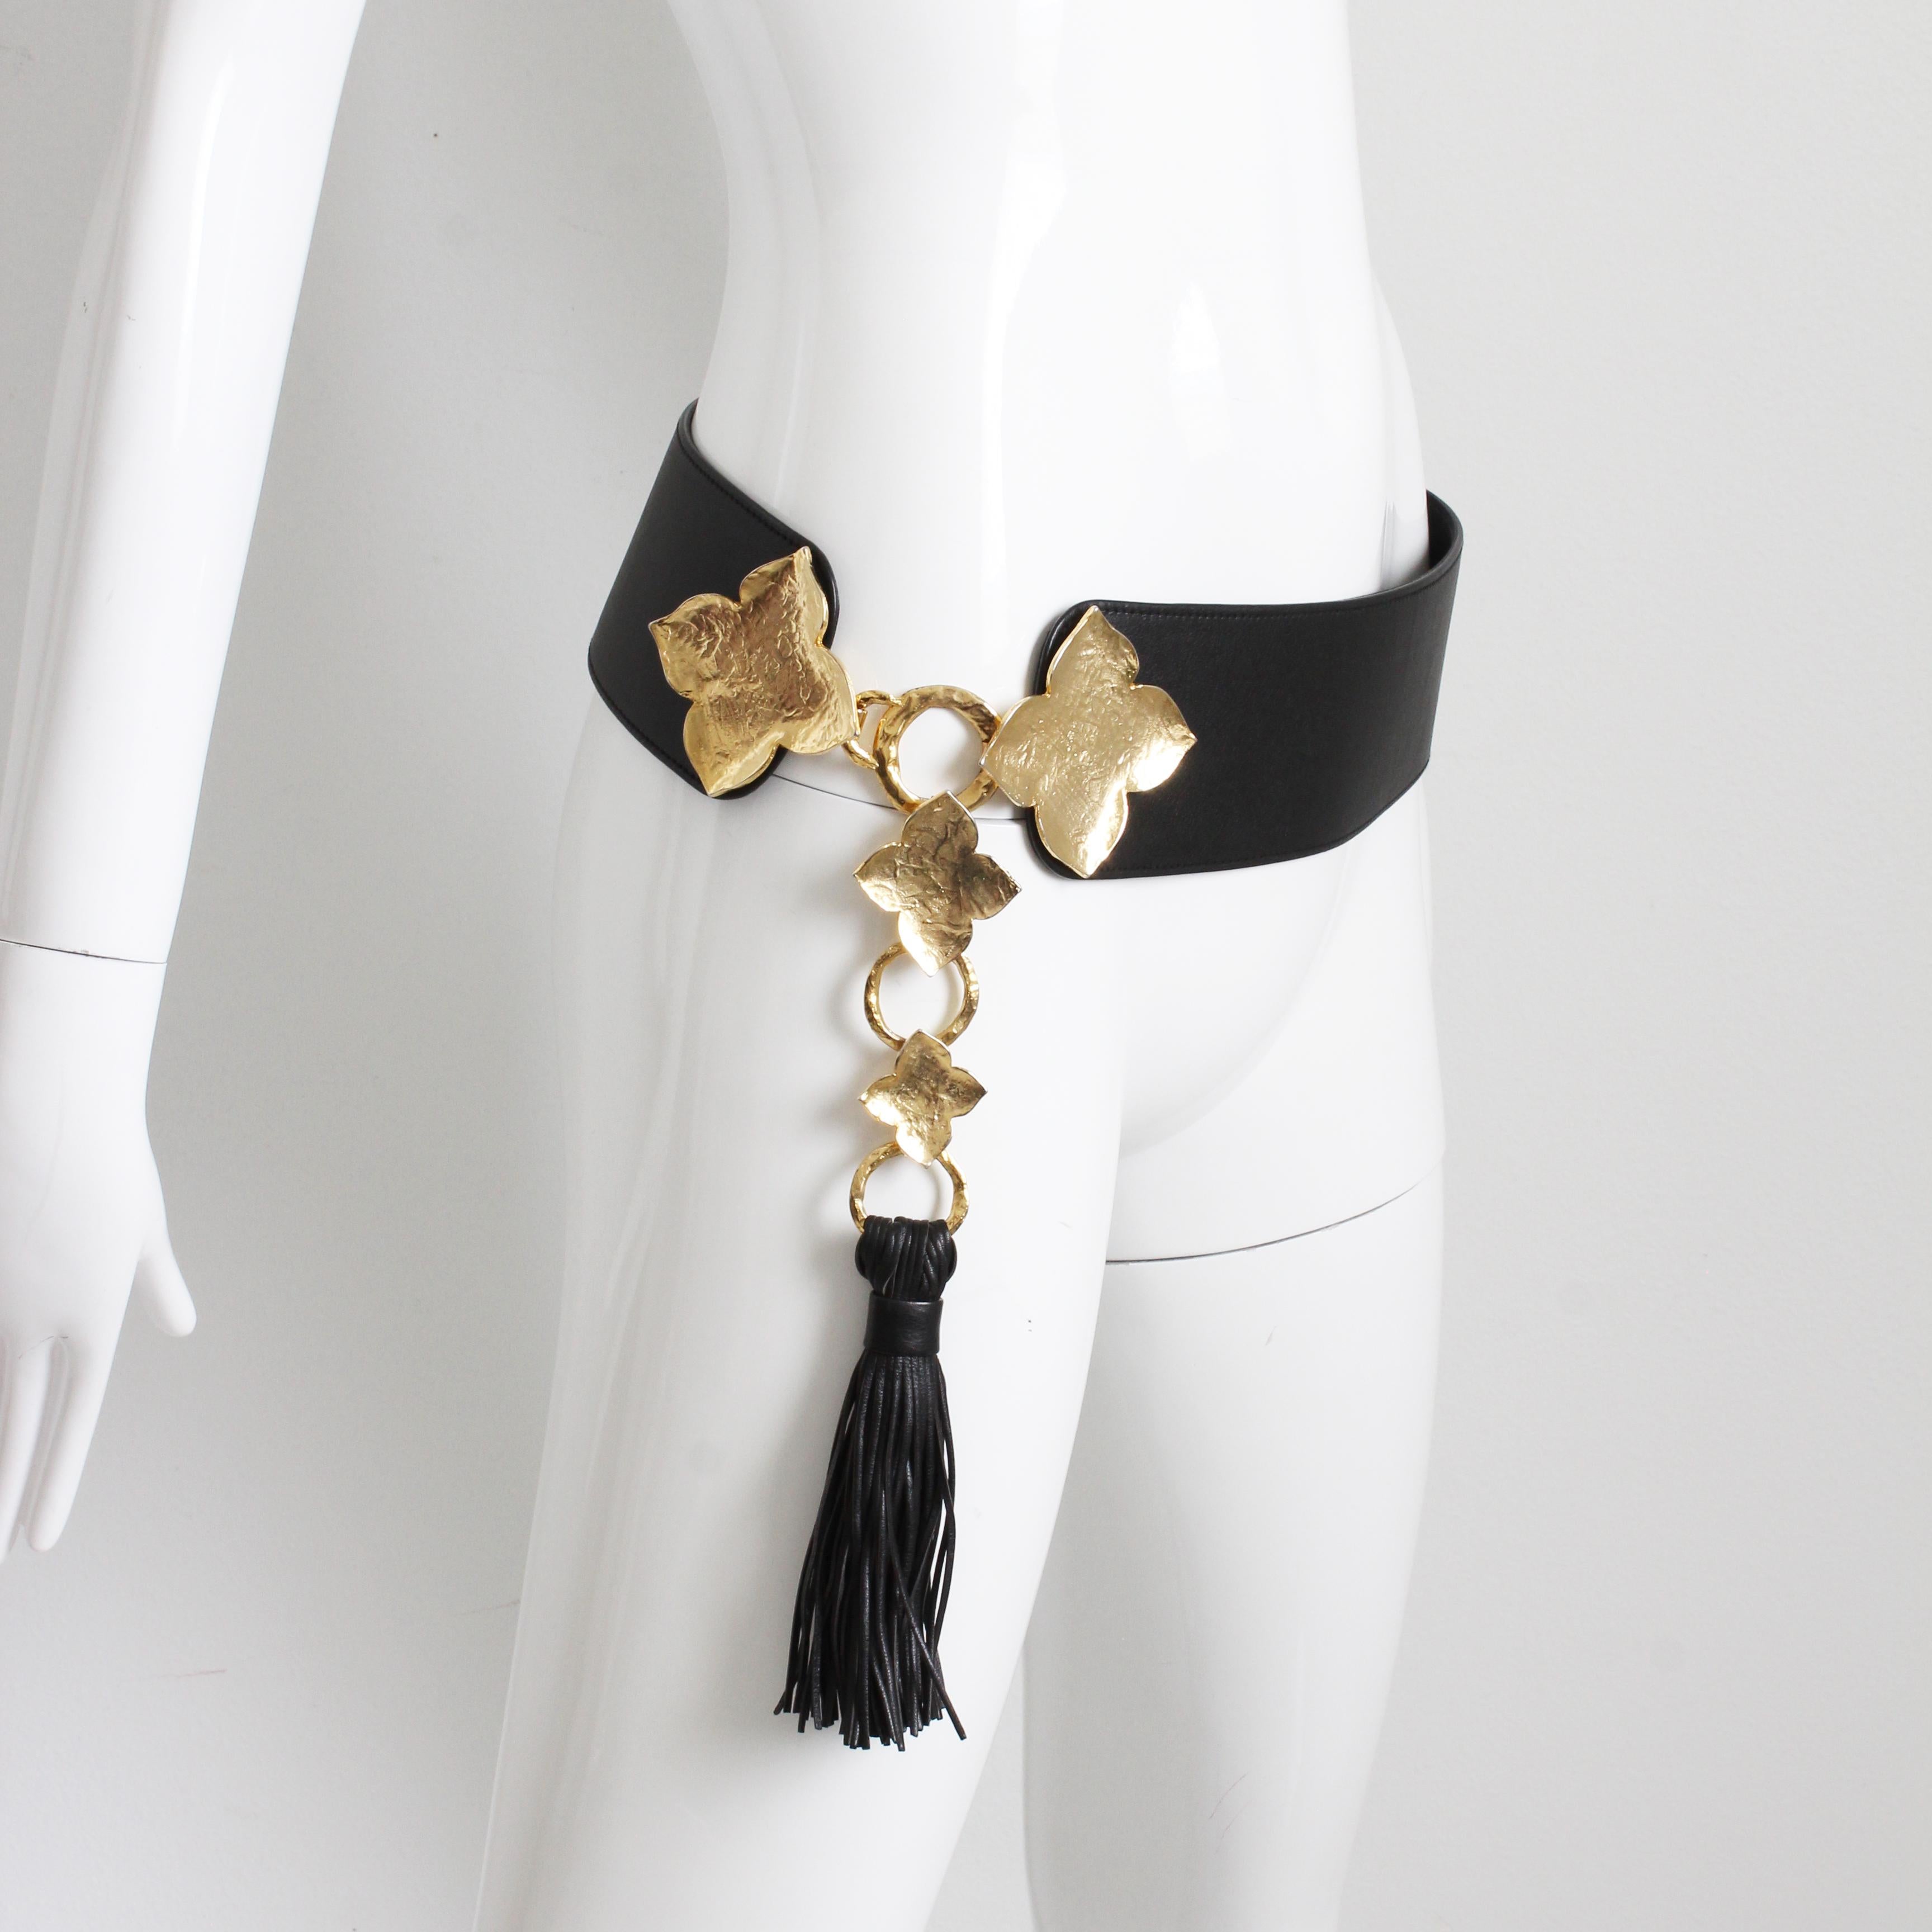 Preowned Yves Saint Laurent wide belt with oversized abstract gold leaf buckle and tassel, likely made in the 2000s.  Most definitely a statement piece! Made from a wide black leather strap that measures 3in H, the gold leaf buckle and leather